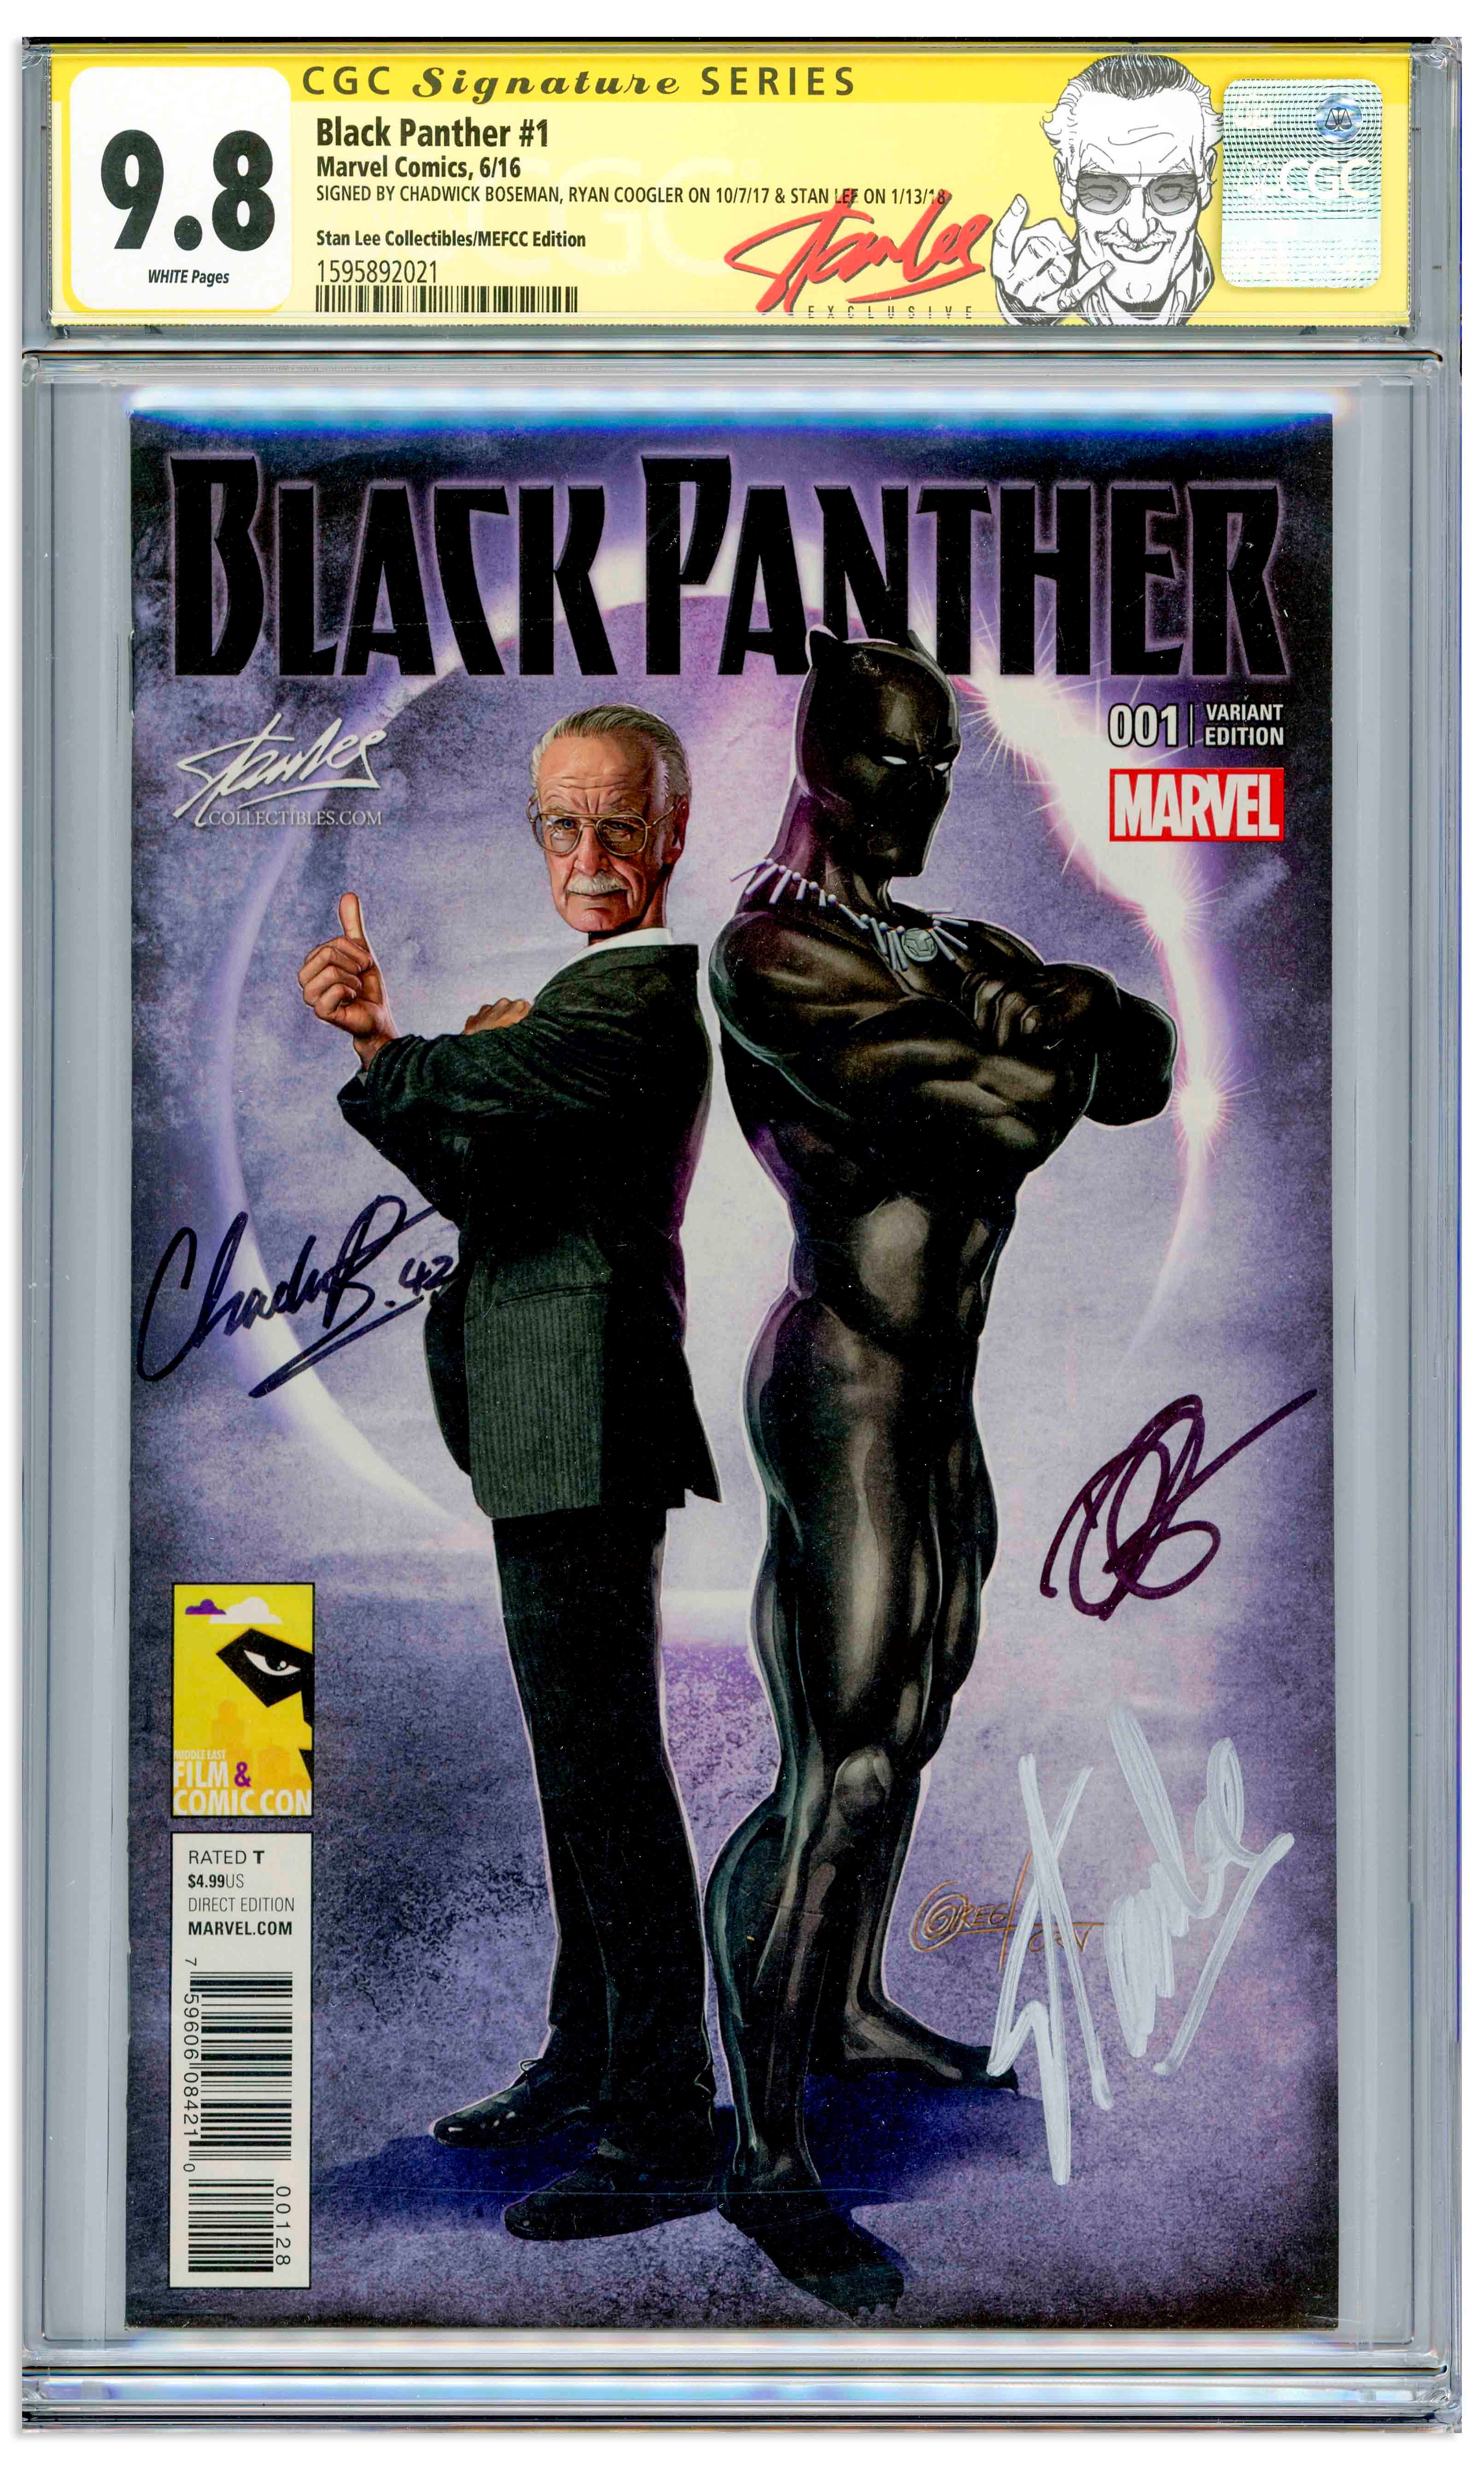 Black Panther #1, signed by Chadwick Boseman and Stan Lee